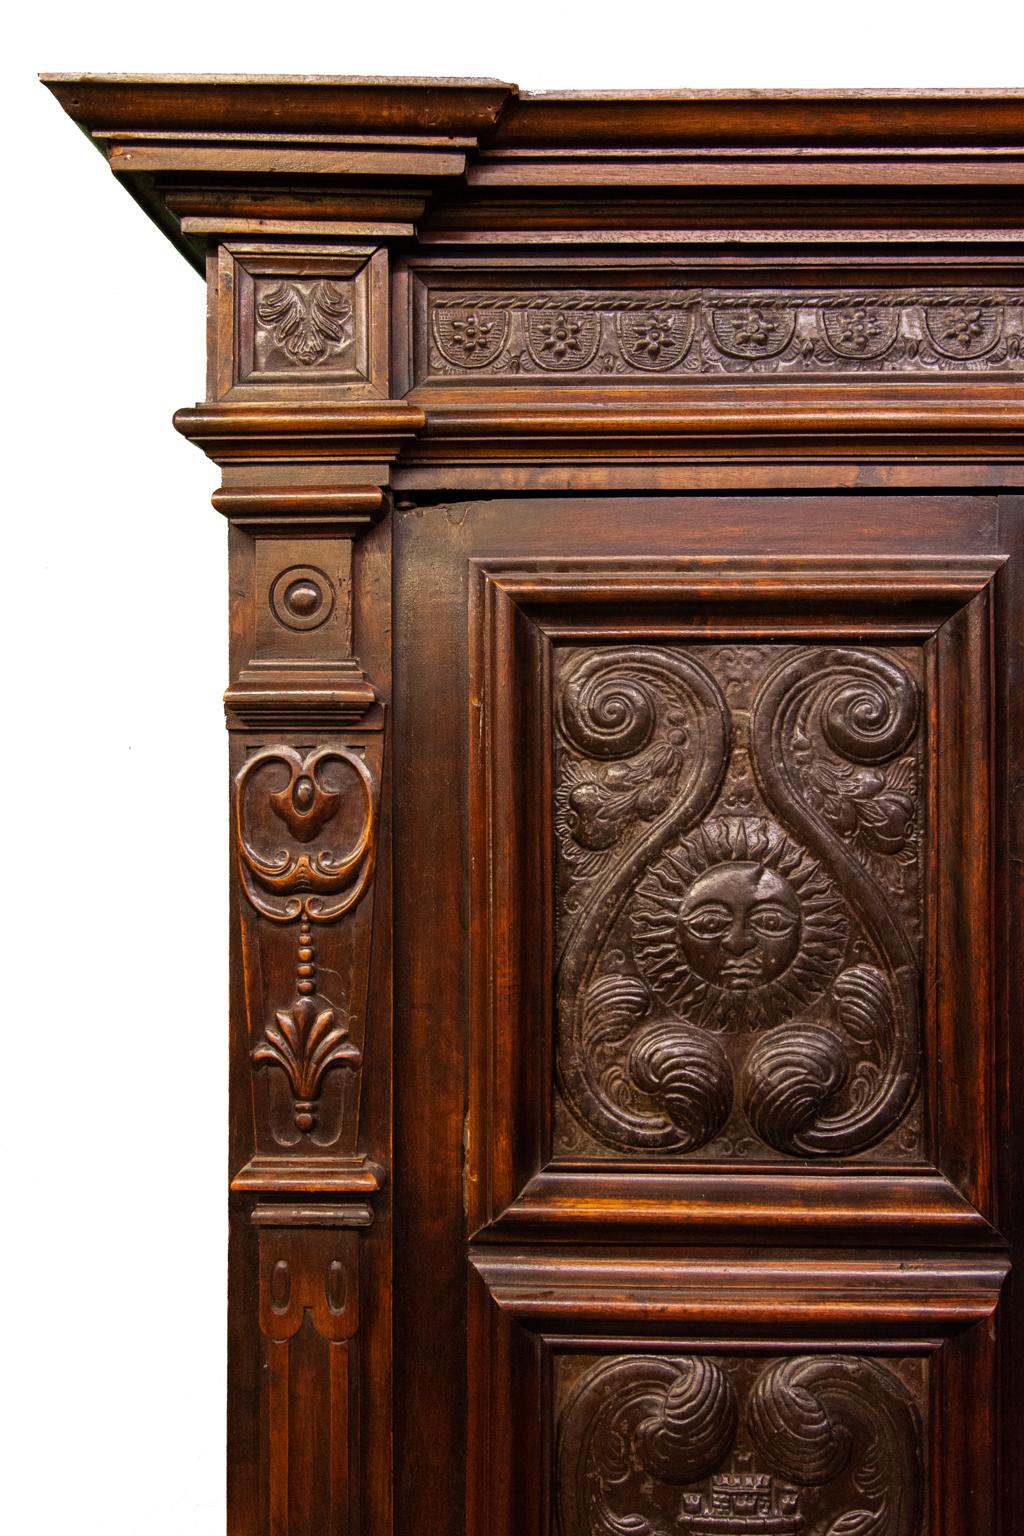 Carved French walnut punched tin cabinet, with deep cornice above tin lined frieze, above double doors each with tin panels depicting a man in the moon, a sun, baskets, castles, and palm trees, sides also with tin panels. Lower section with carved